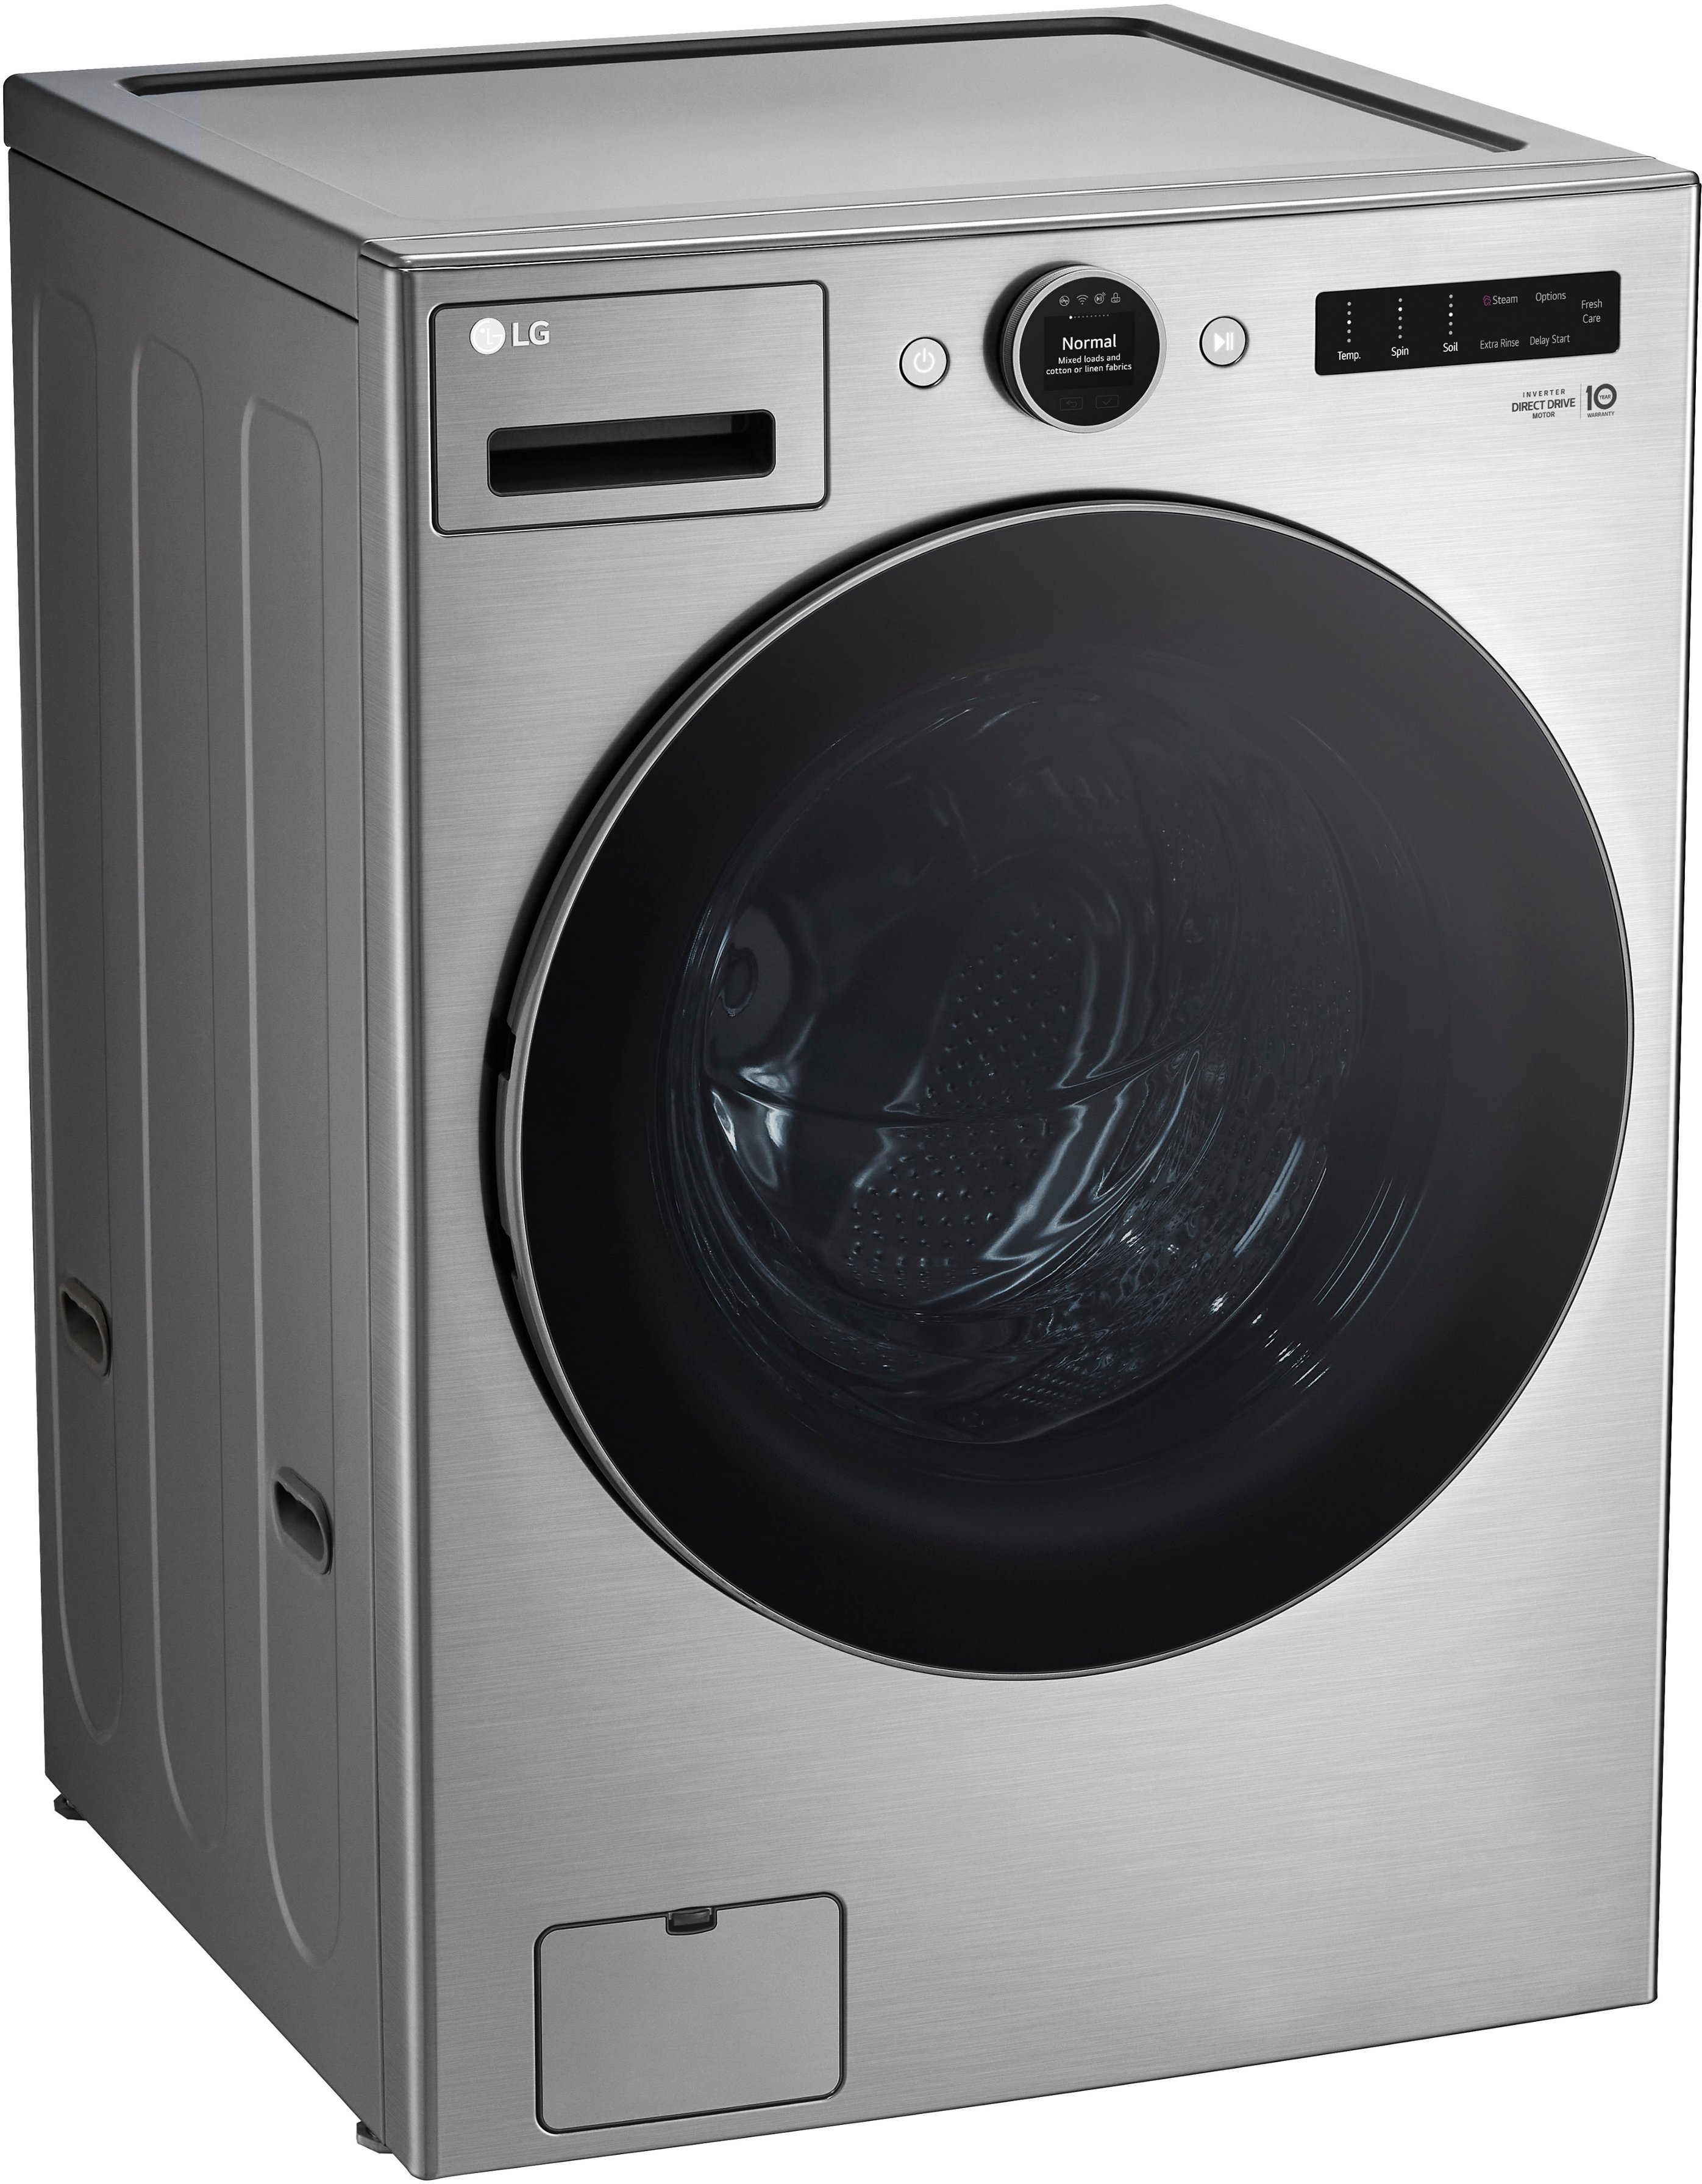 LG WM5500HVA 27 Inch Smart Front Load Washer with 4.5 cu. ft. Capacity, ,  Digital Dial Control, LCD Display, AI DD®, Allergiene® Cycle,LG ThinQ®,  NeveRust® Drum, and ENERGY STAR Certified: Graphite Steel